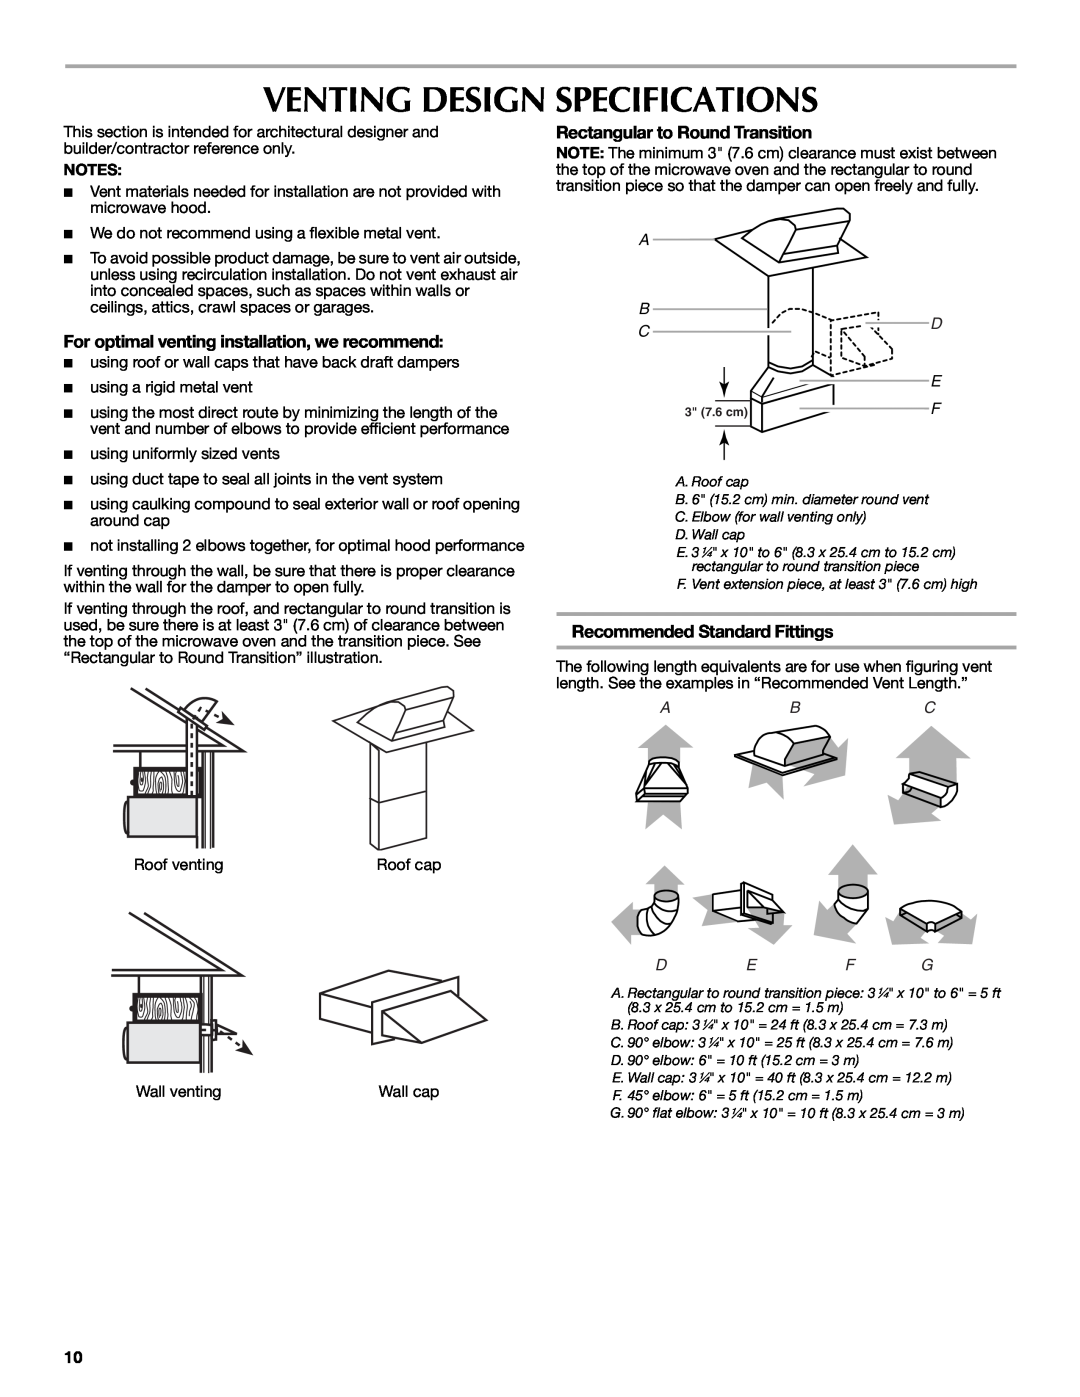 Maytag W10188238A, W10188947A Venting Design Specifications, For optimal venting installation, we recommend, Defg 